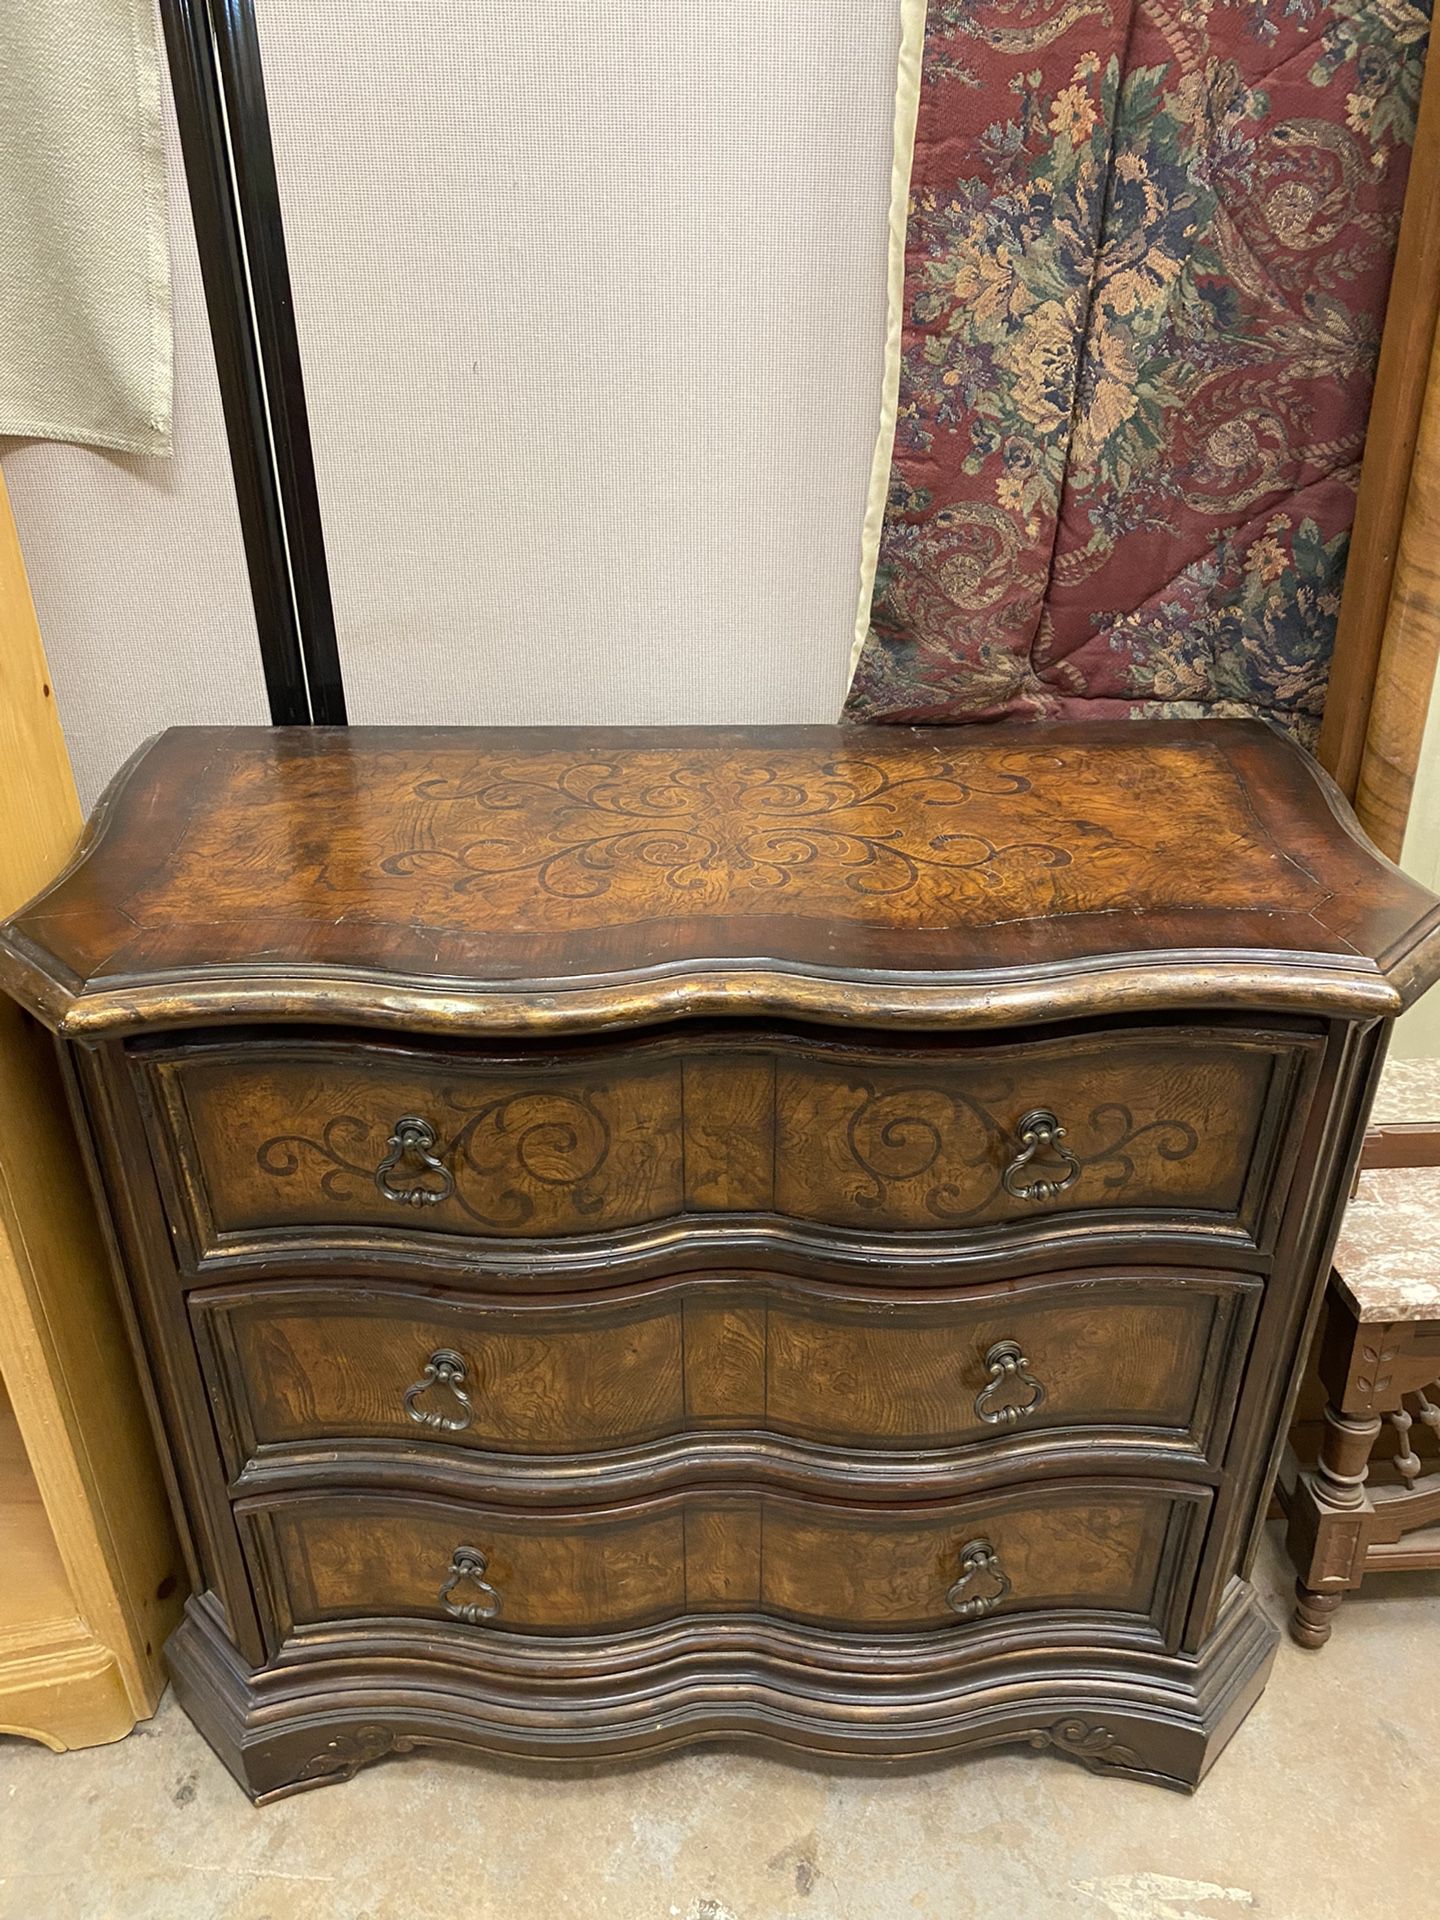 Large Ornate Dark Wood Chest Of Drawers 